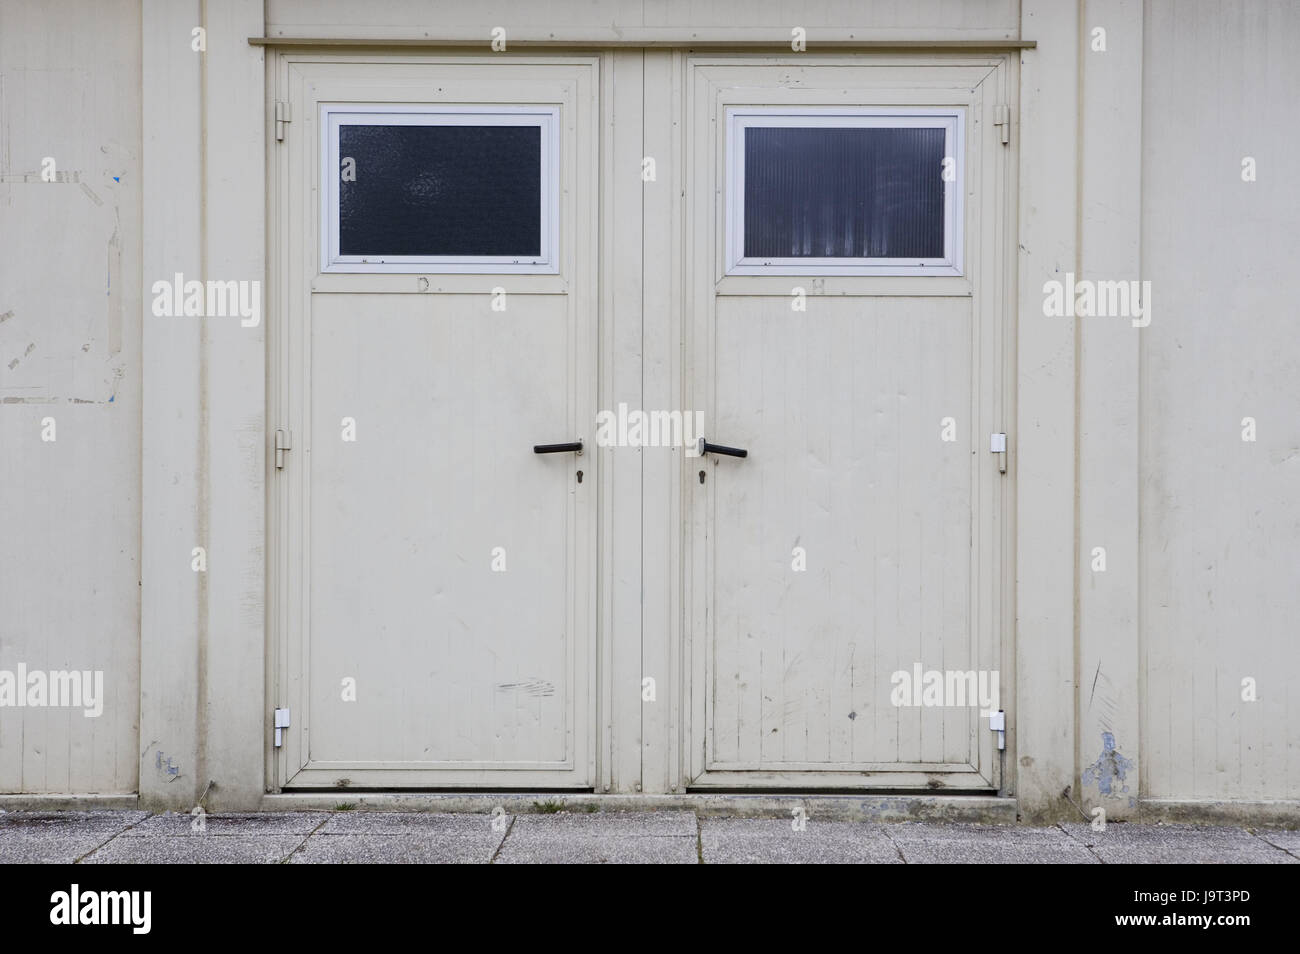 Factory building,doors,closed,building,old,white,facade,metal doors,iron doors,double door,input,exit,on the left,on the right,conception,choice,decision,access,closely,dreary,exited,architecture,detail,nobody,outside, Stock Photo